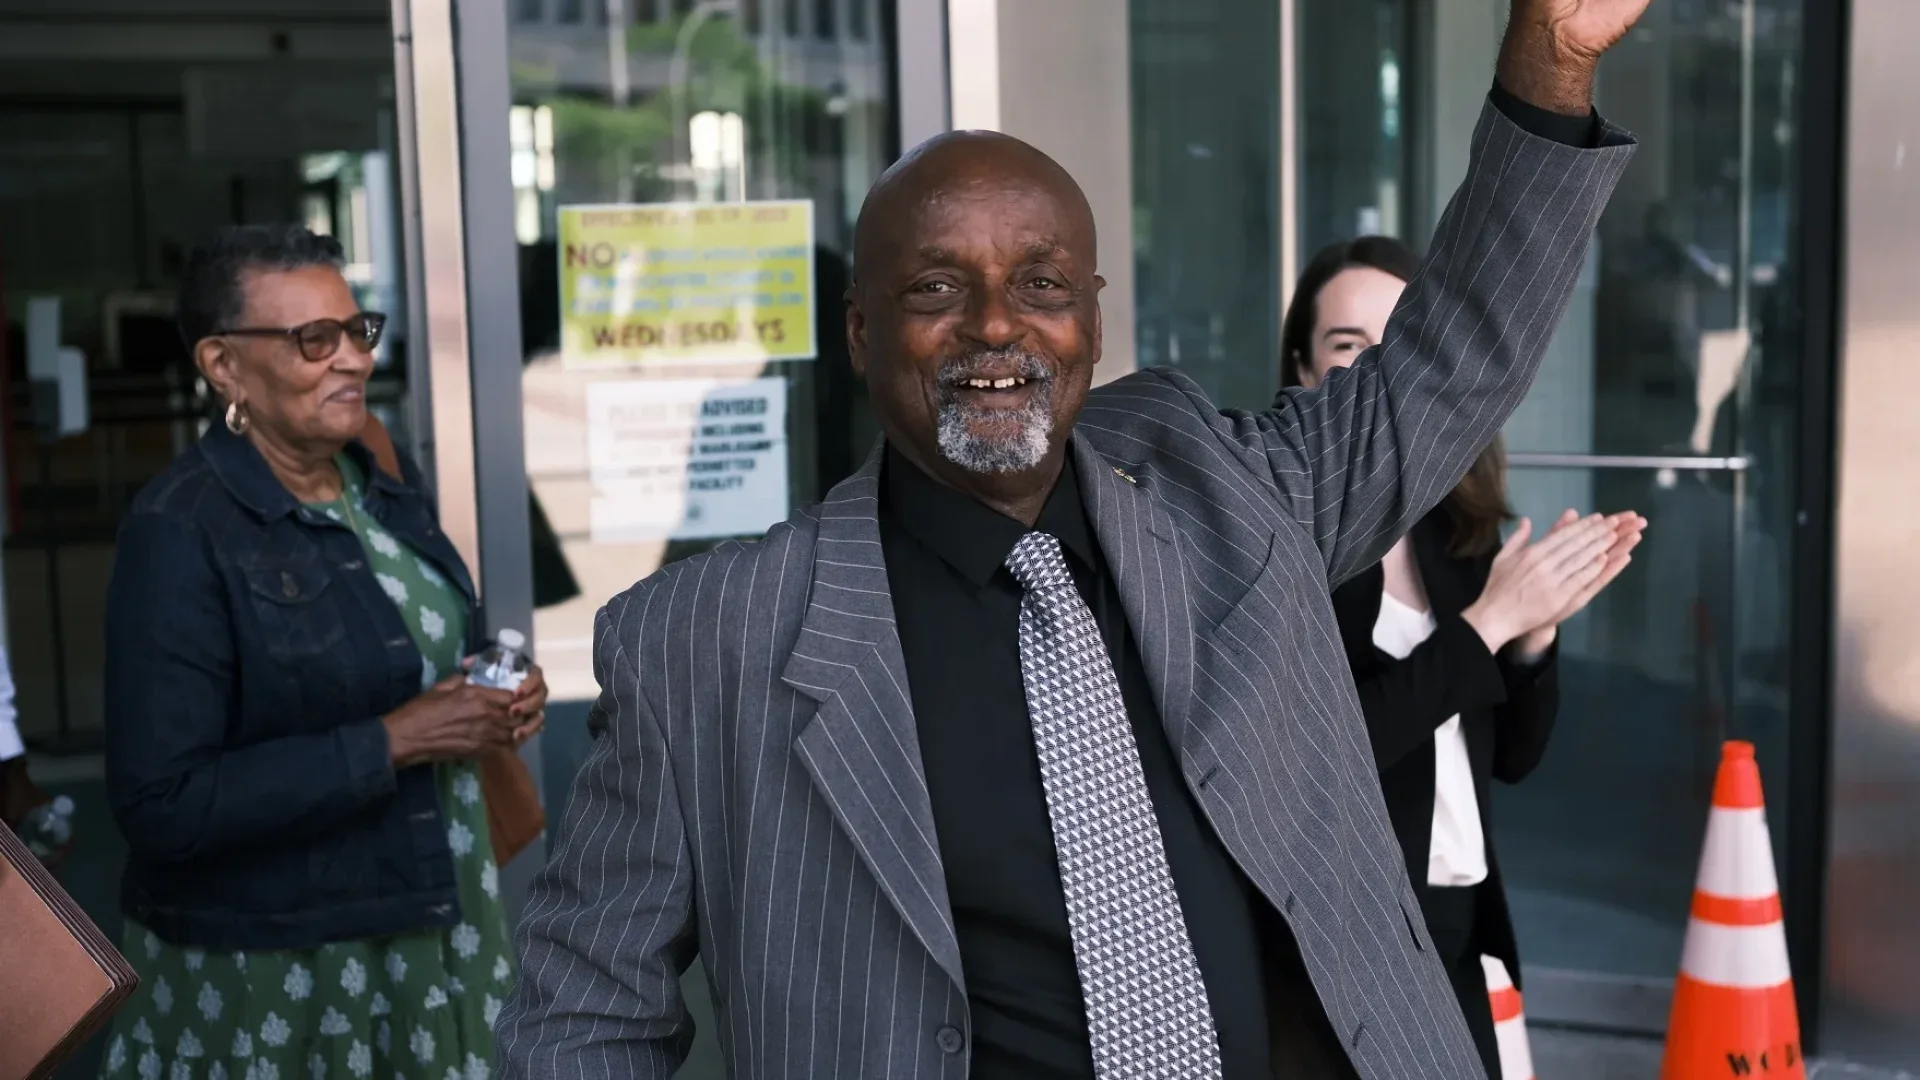 Black Man Wrongfully Convicted Of Rape Exonerated By DNA Evidence 47 Years Later